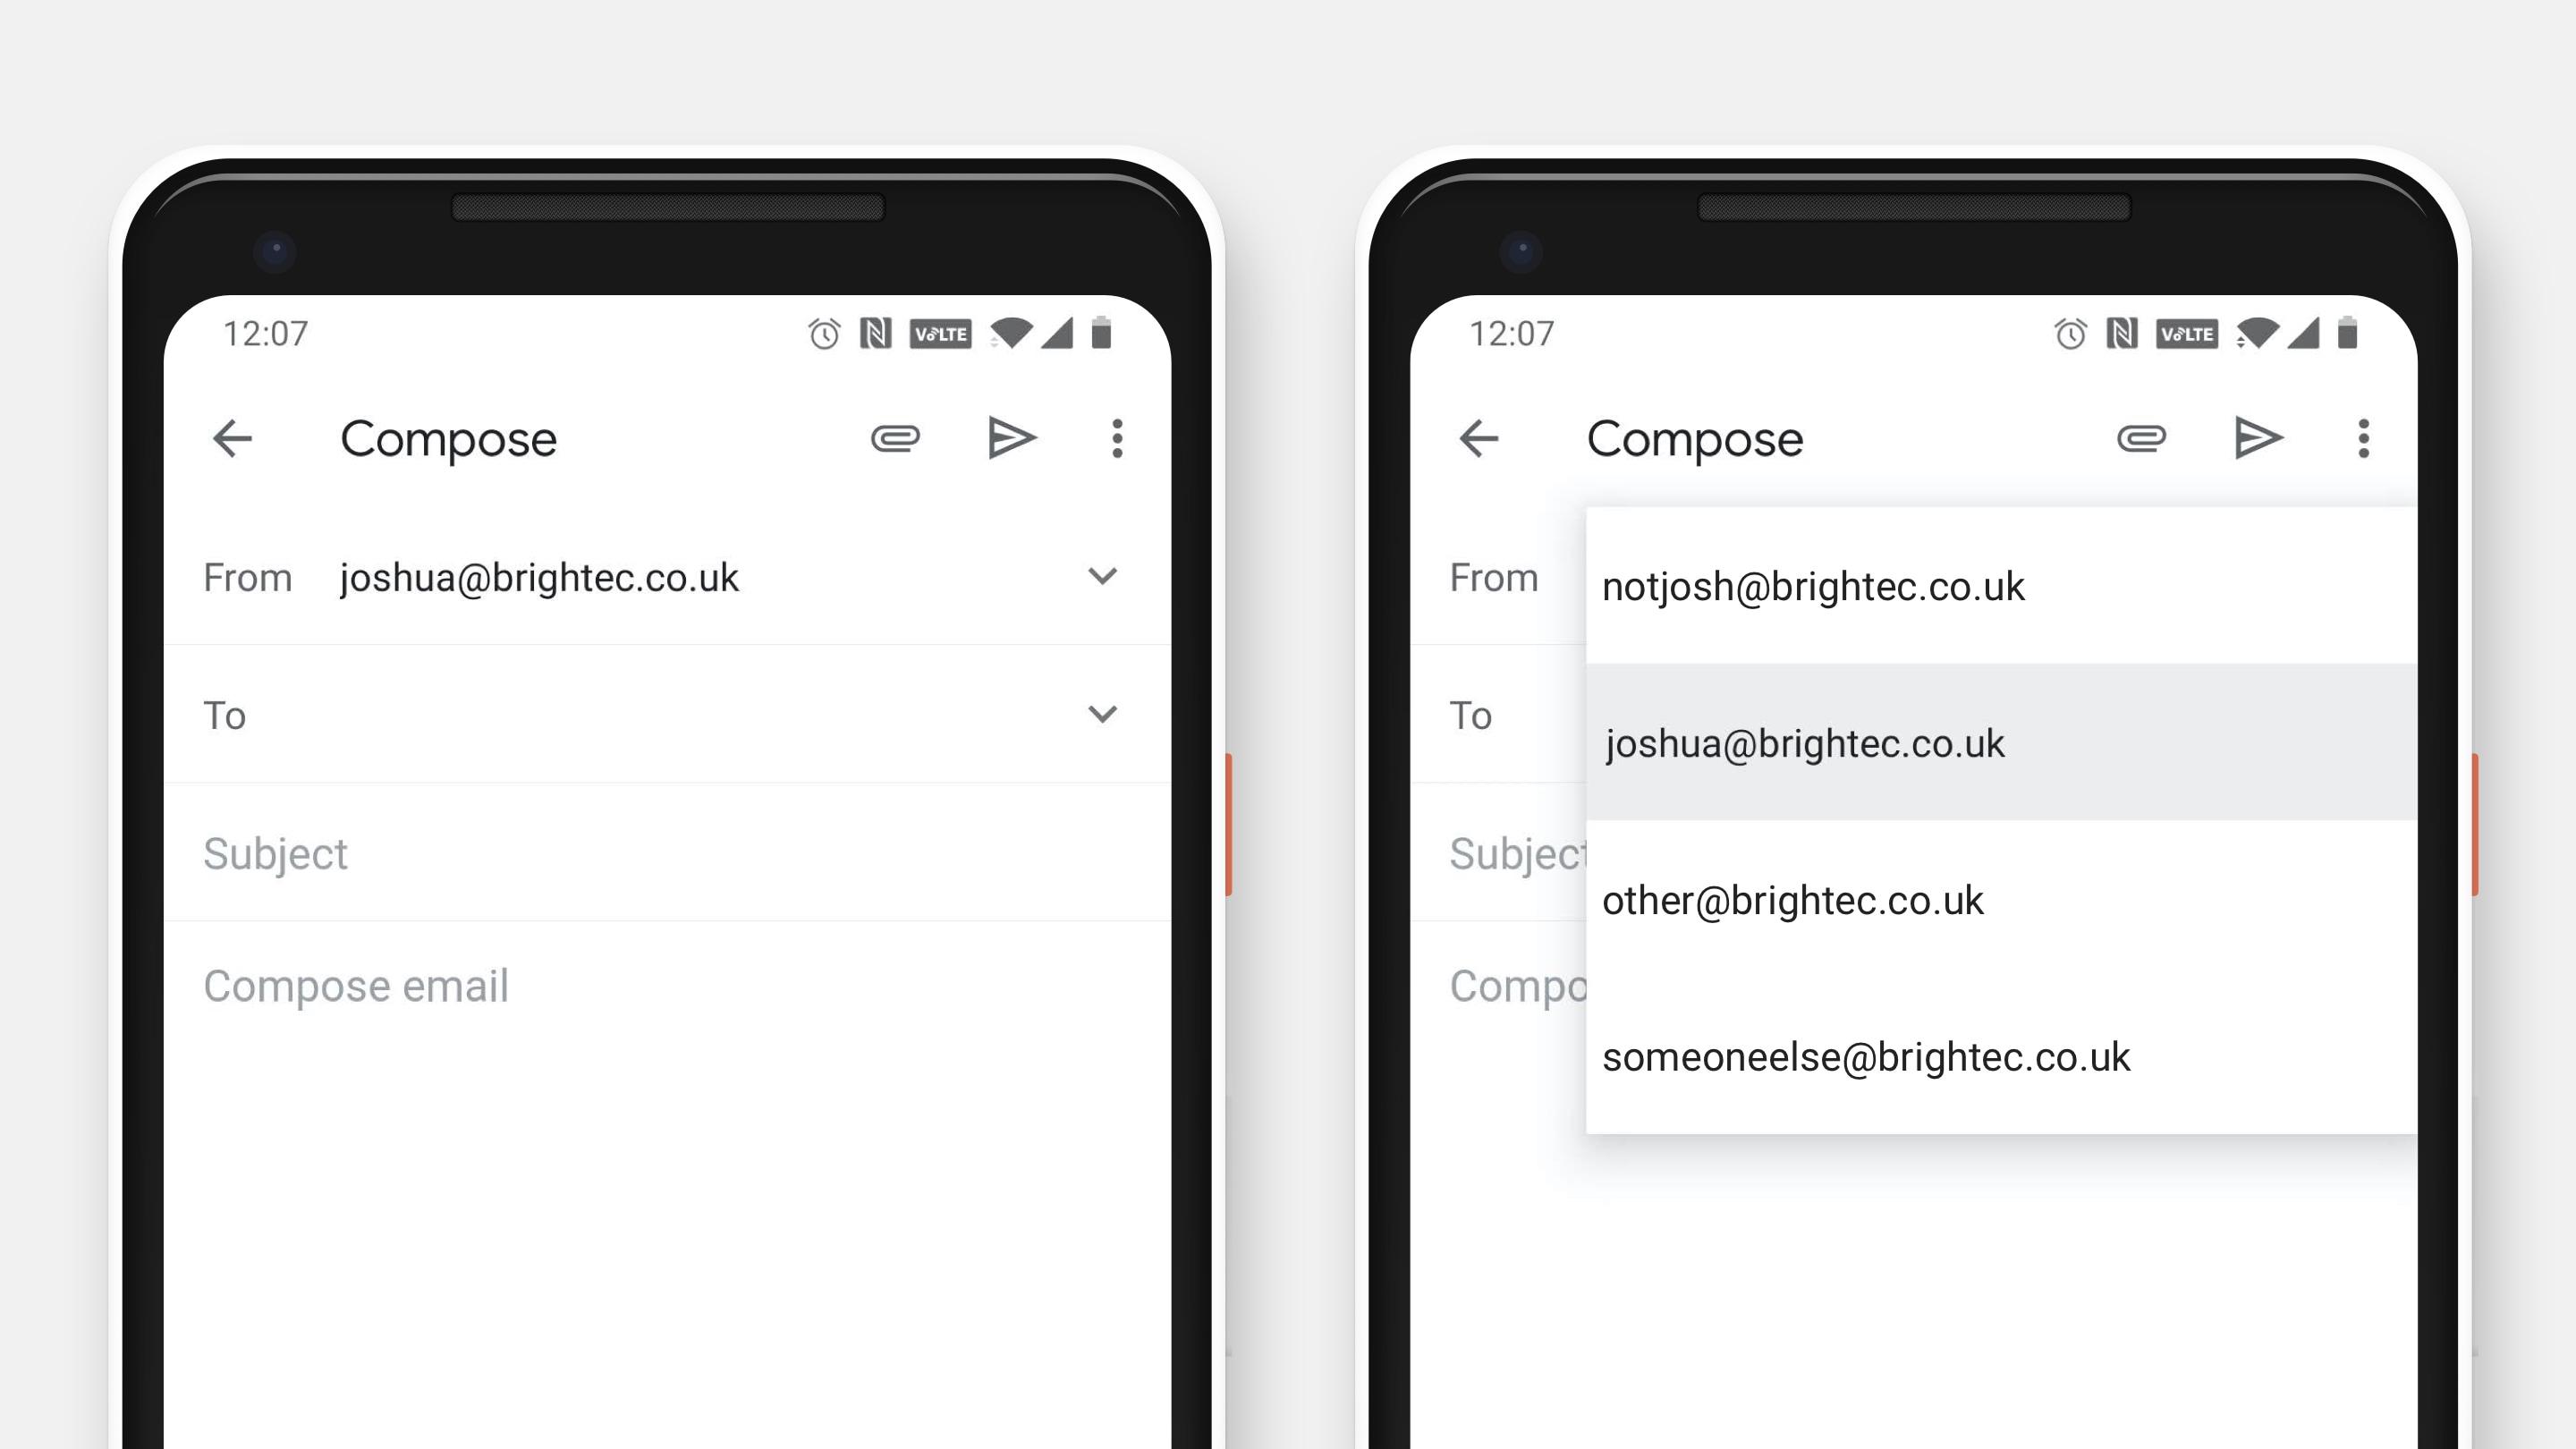 The GMail app showing a great example of an Android spinner when selecting the email address an email is sent from